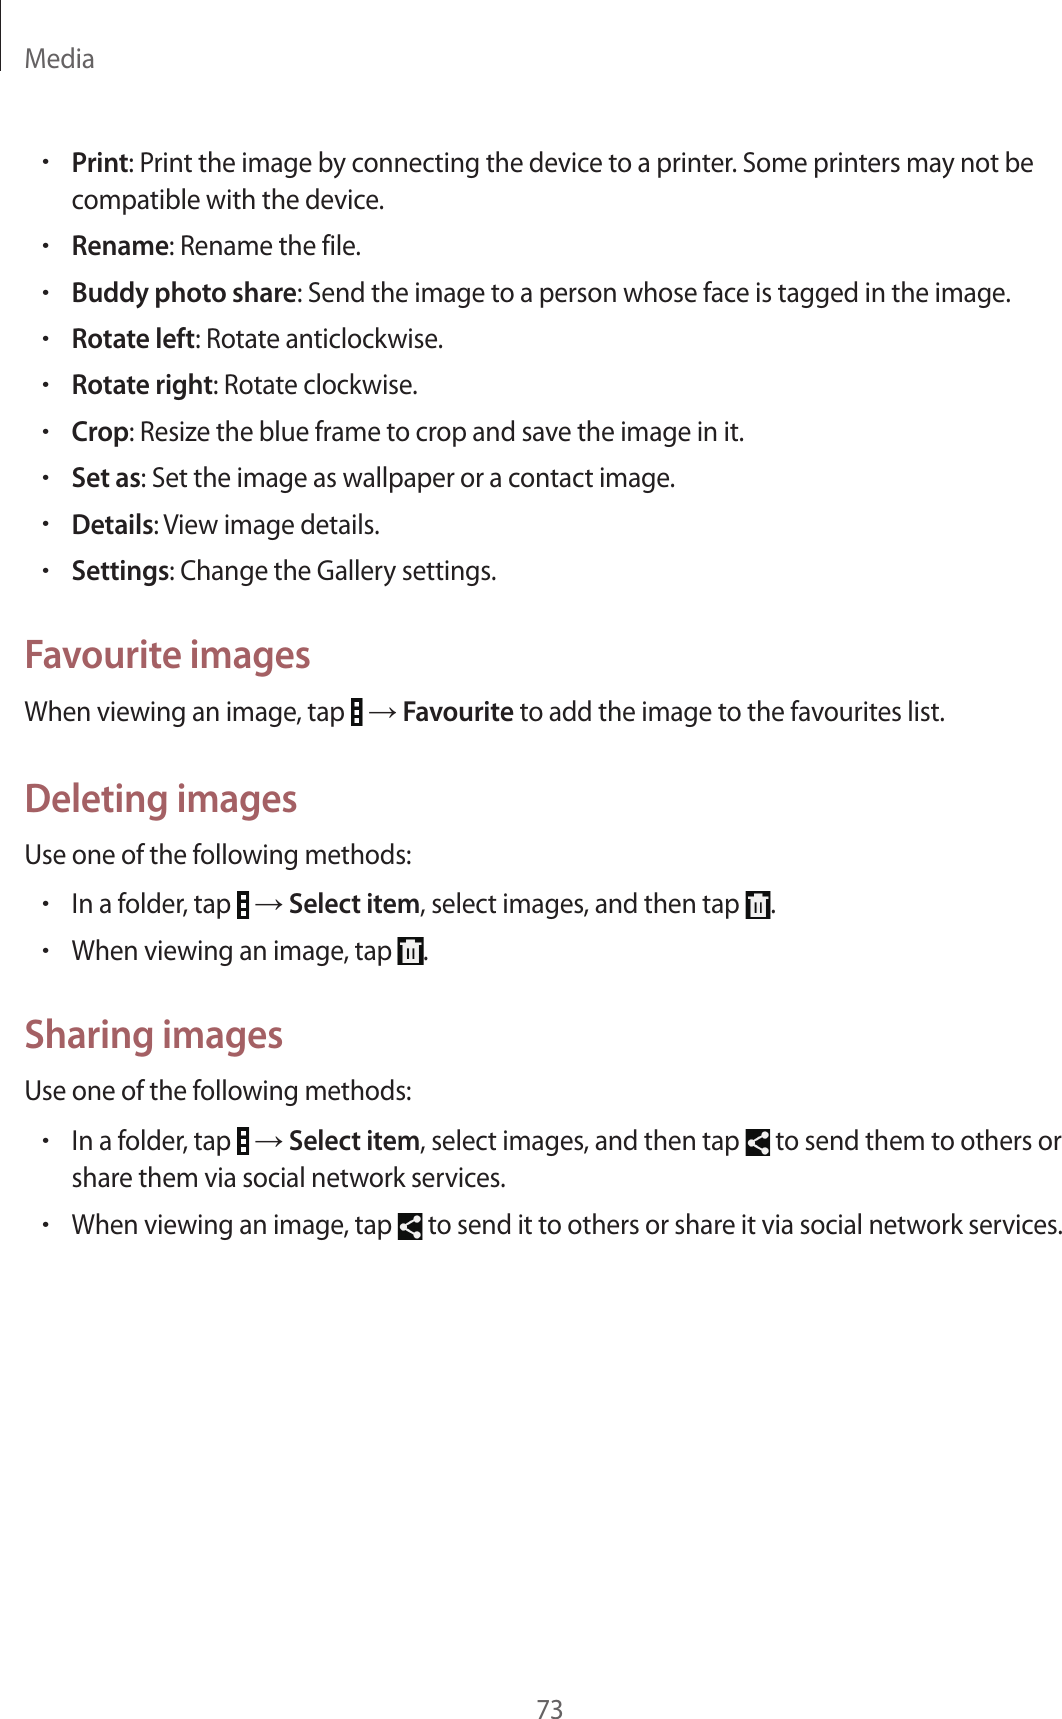 Media73•Print: Print the image by connecting the device to a printer. Some printers may not be compatible with the device.•Rename: Rename the file.•Buddy photo share: Send the image to a person whose face is tagged in the image.•Rotate left: Rotate anticlockwise.•Rotate right: Rotate clockwise.•Crop: Resize the blue frame to crop and save the image in it.•Set as: Set the image as wallpaper or a contact image.•Details: View image details.•Settings: Change the Gallery settings.Favourite imagesWhen viewing an image, tap   → Favourite to add the image to the favourites list.Deleting imagesUse one of the following methods:•In a folder, tap   → Select item, select images, and then tap  .•When viewing an image, tap  .Sharing imagesUse one of the following methods:•In a folder, tap   → Select item, select images, and then tap   to send them to others or share them via social network services.•When viewing an image, tap   to send it to others or share it via social network services.